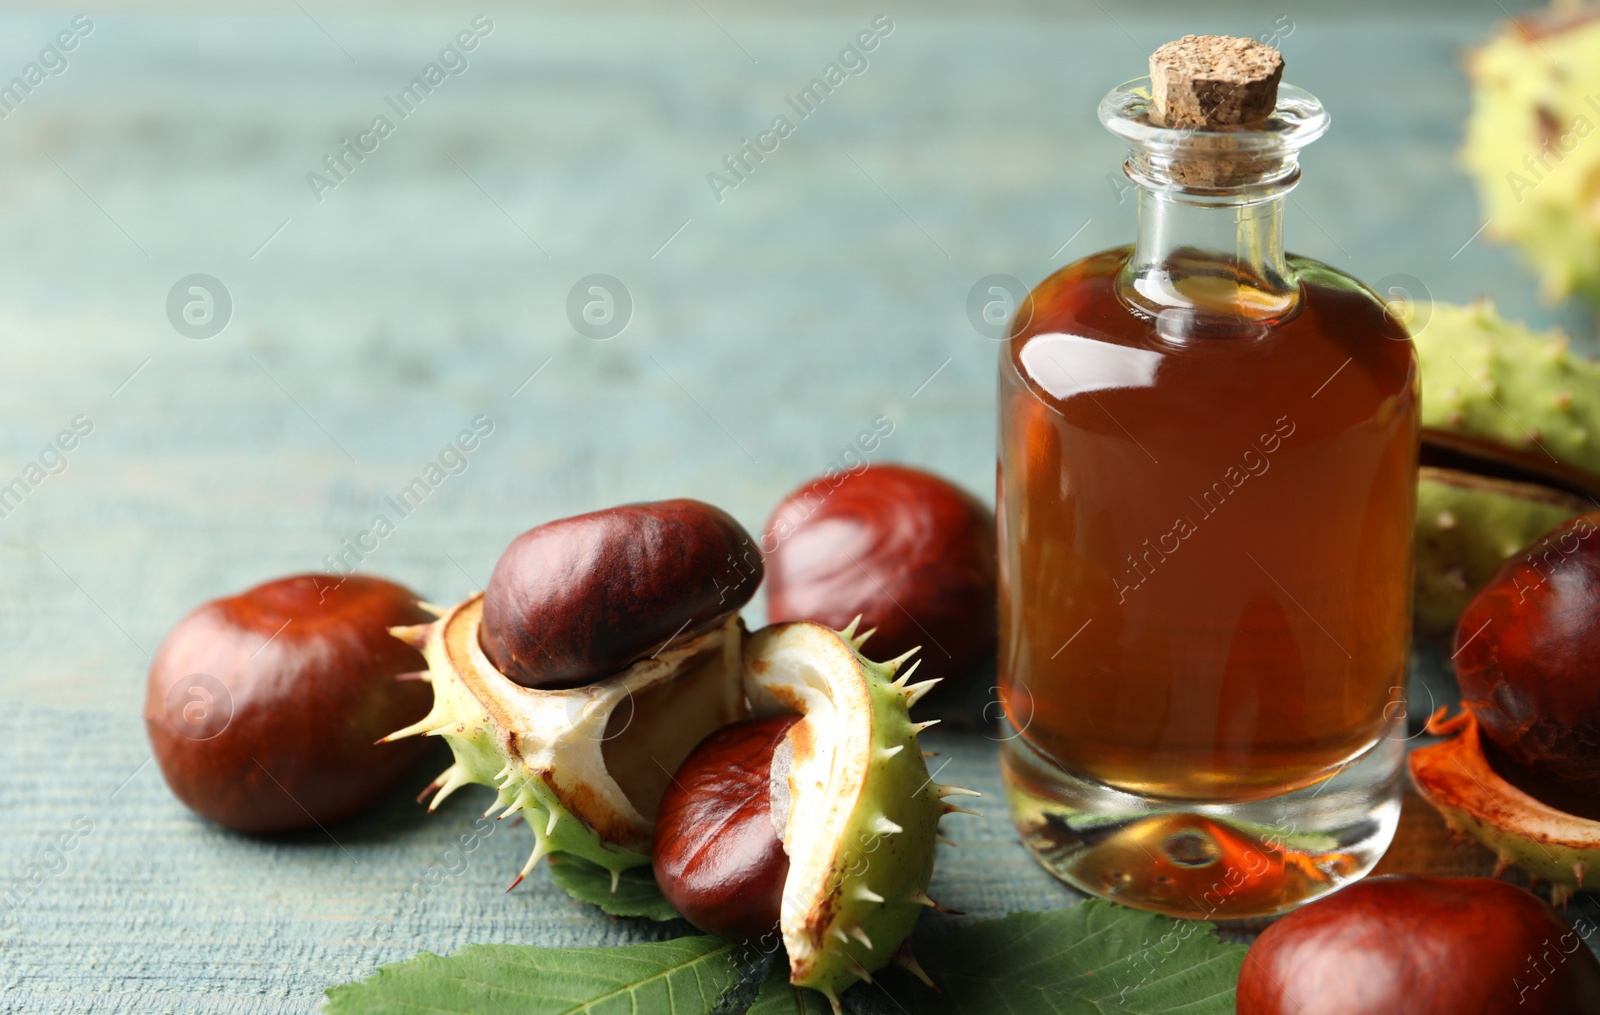 Photo of Chestnuts and bottle of essential oil on blue wooden table